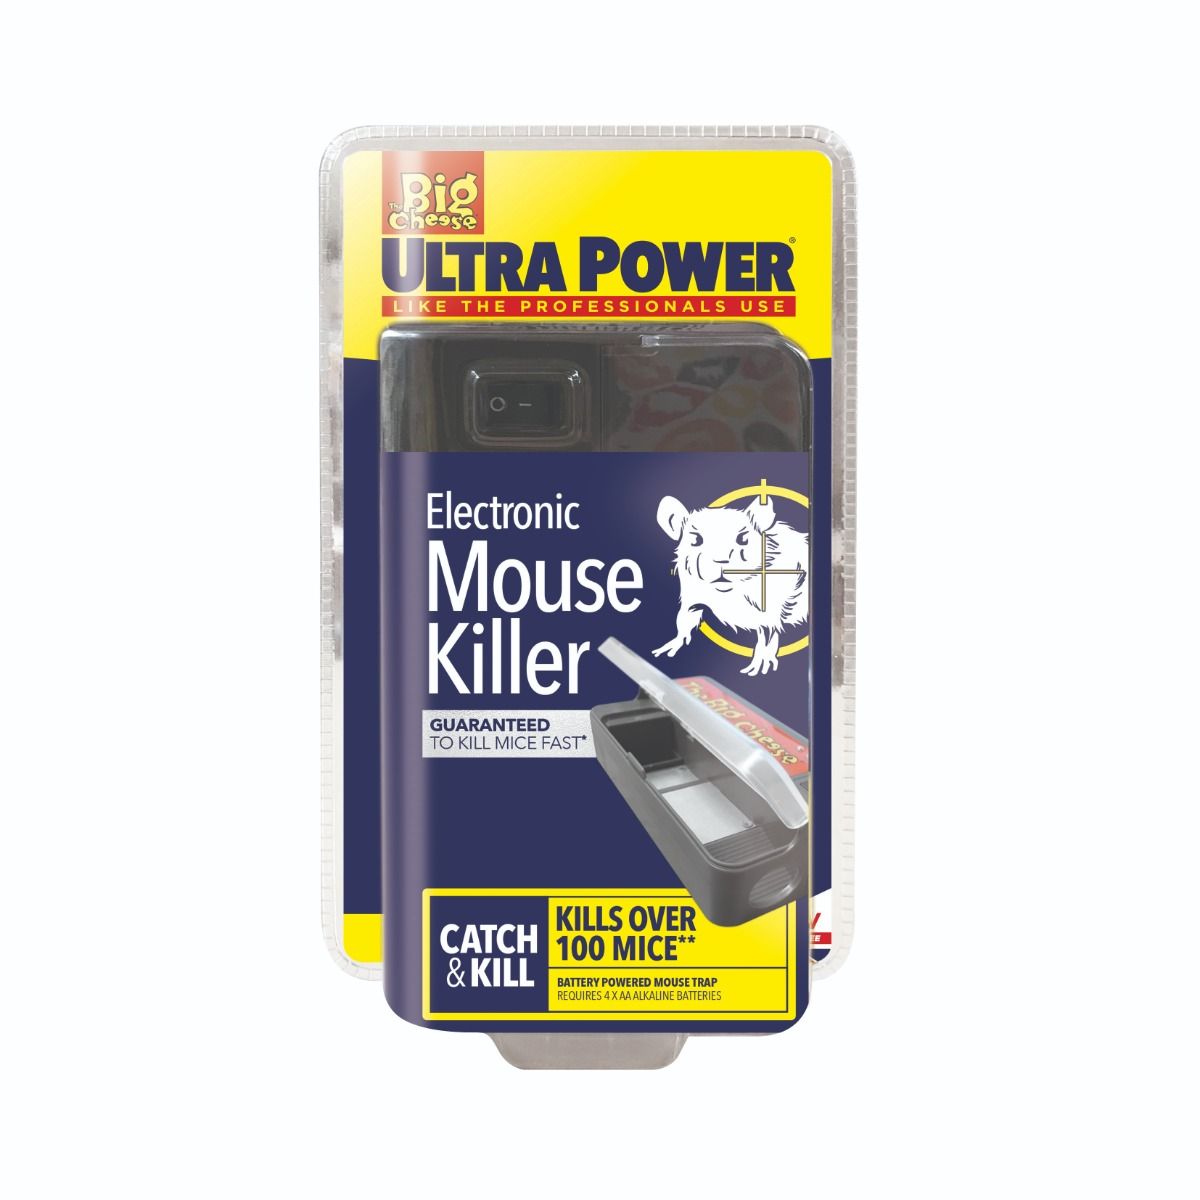 Big-Cheese-Ultra-Power-Electronic-Mouse-Killer